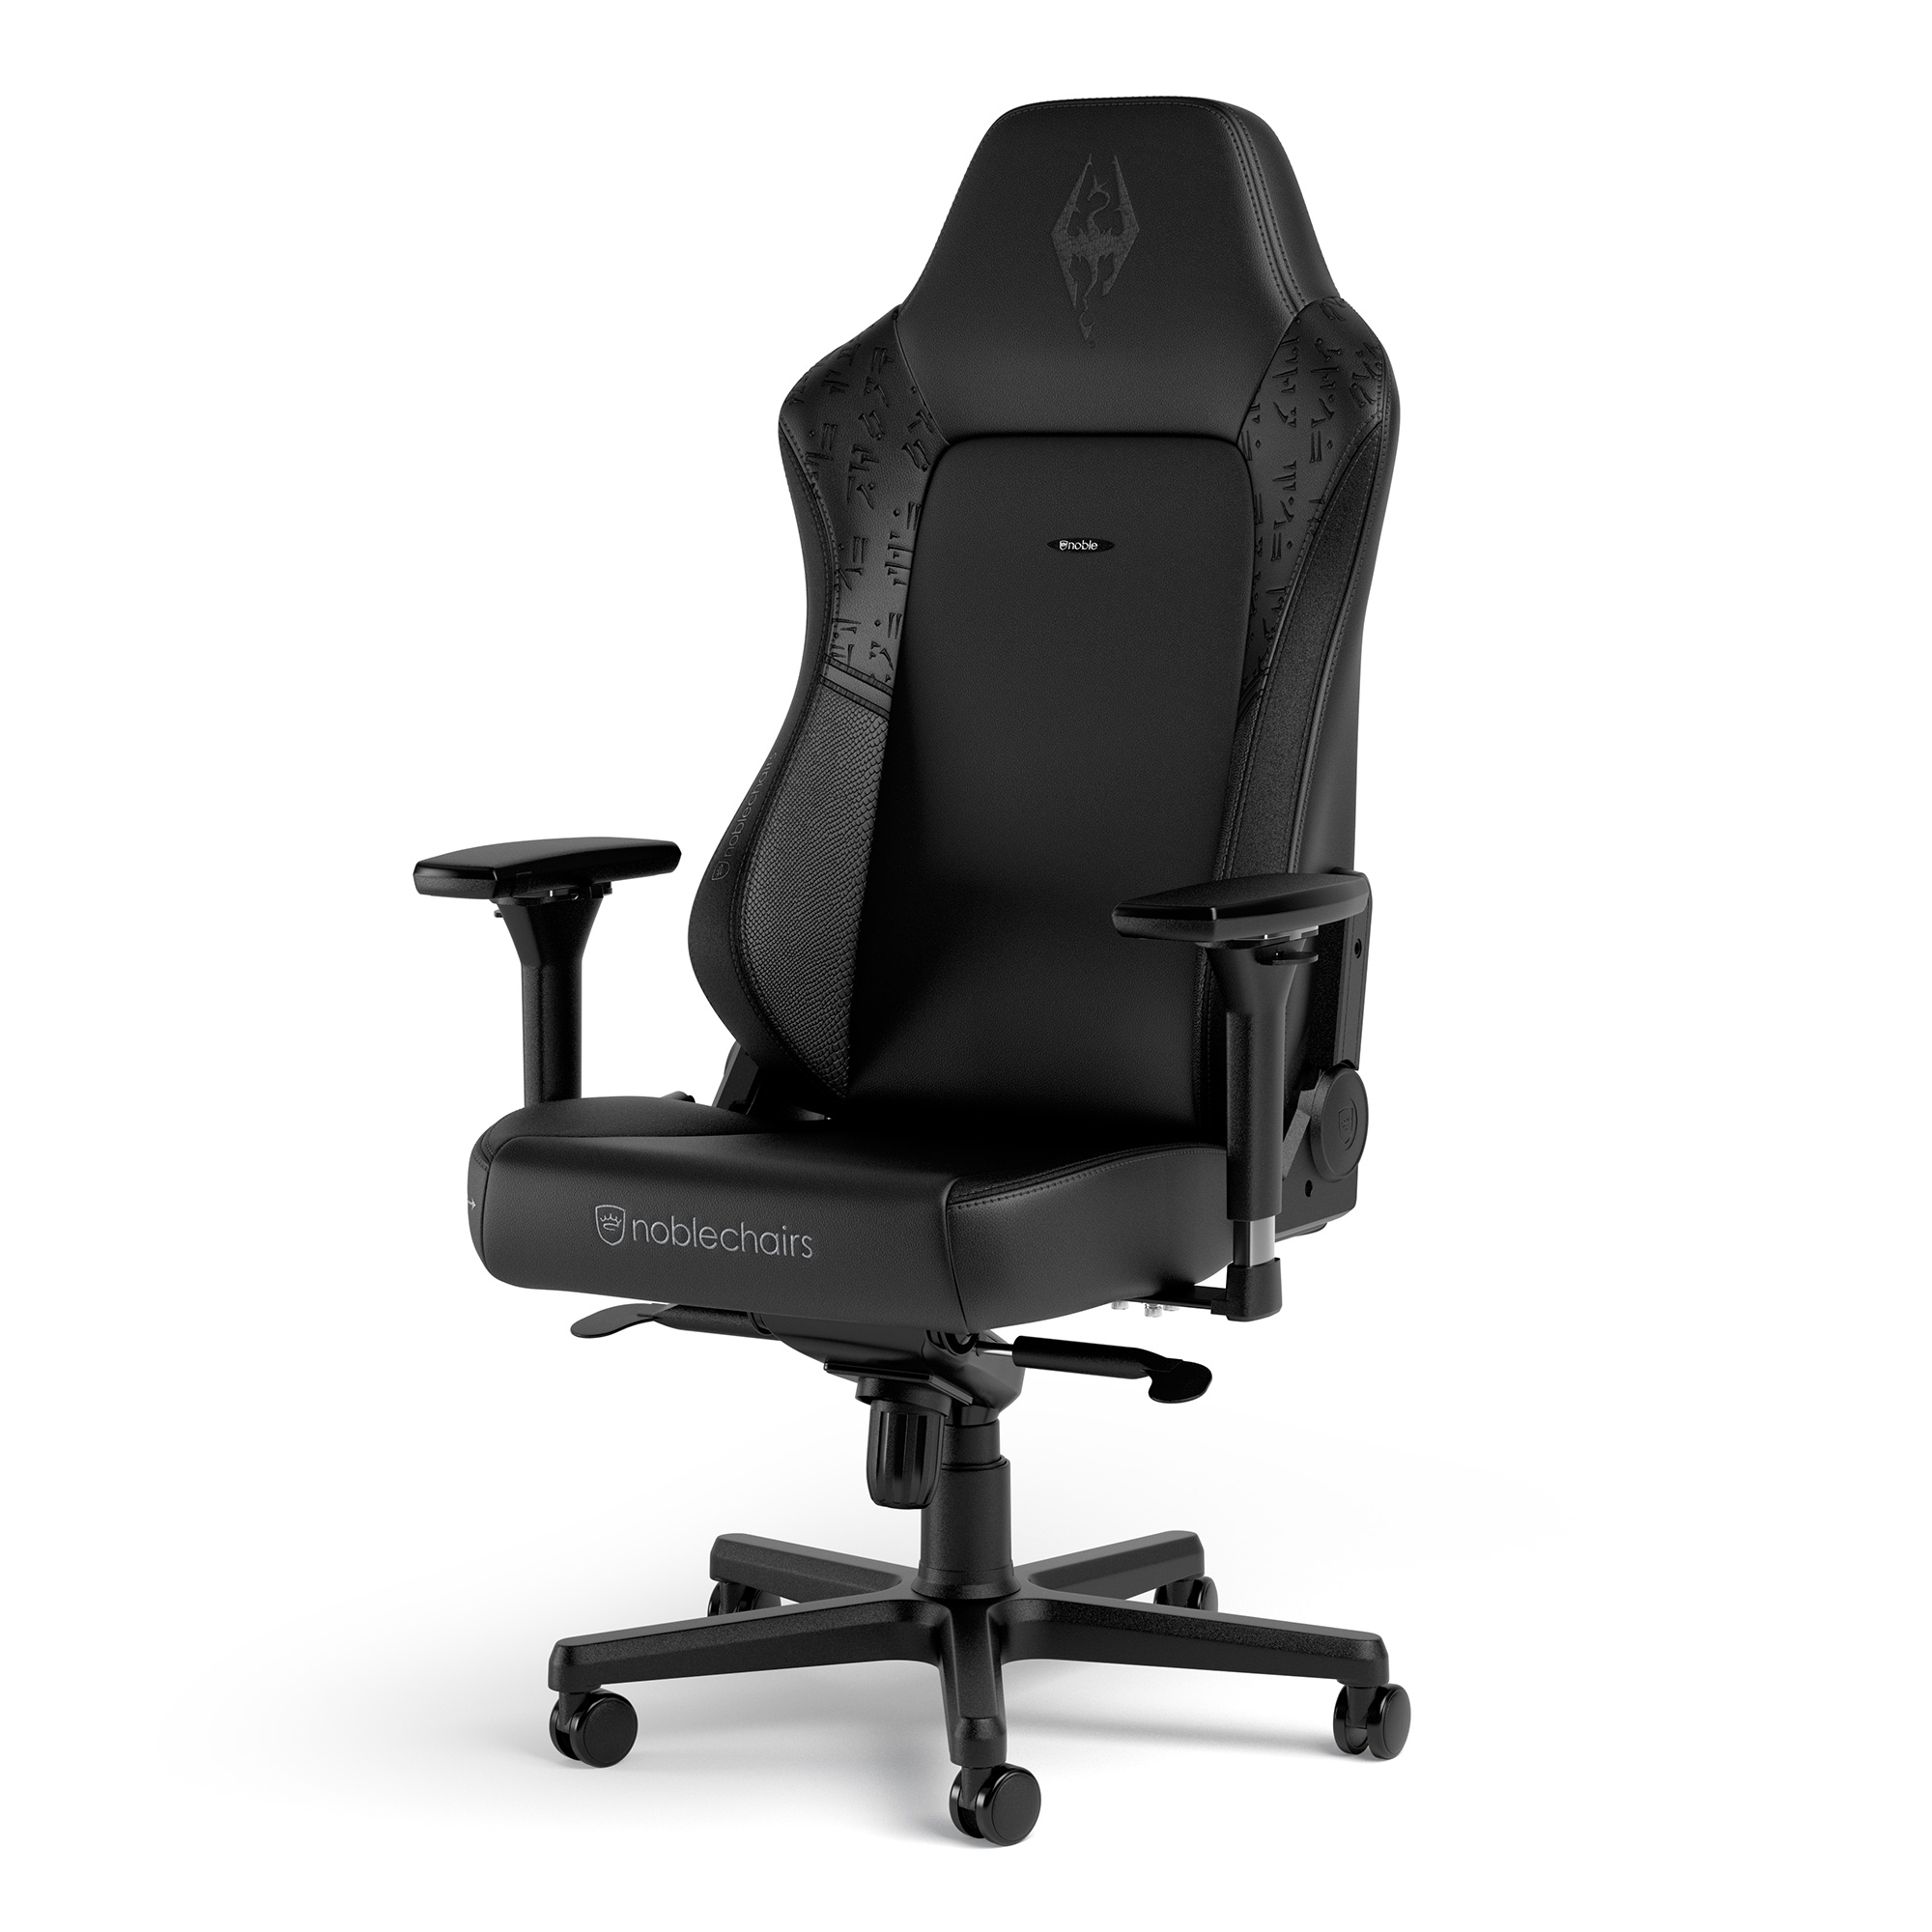 noblechairs - noblechairs HERO Gaming Chair The Elder Scrolls V: Skyrim 10th Anniversary Edition